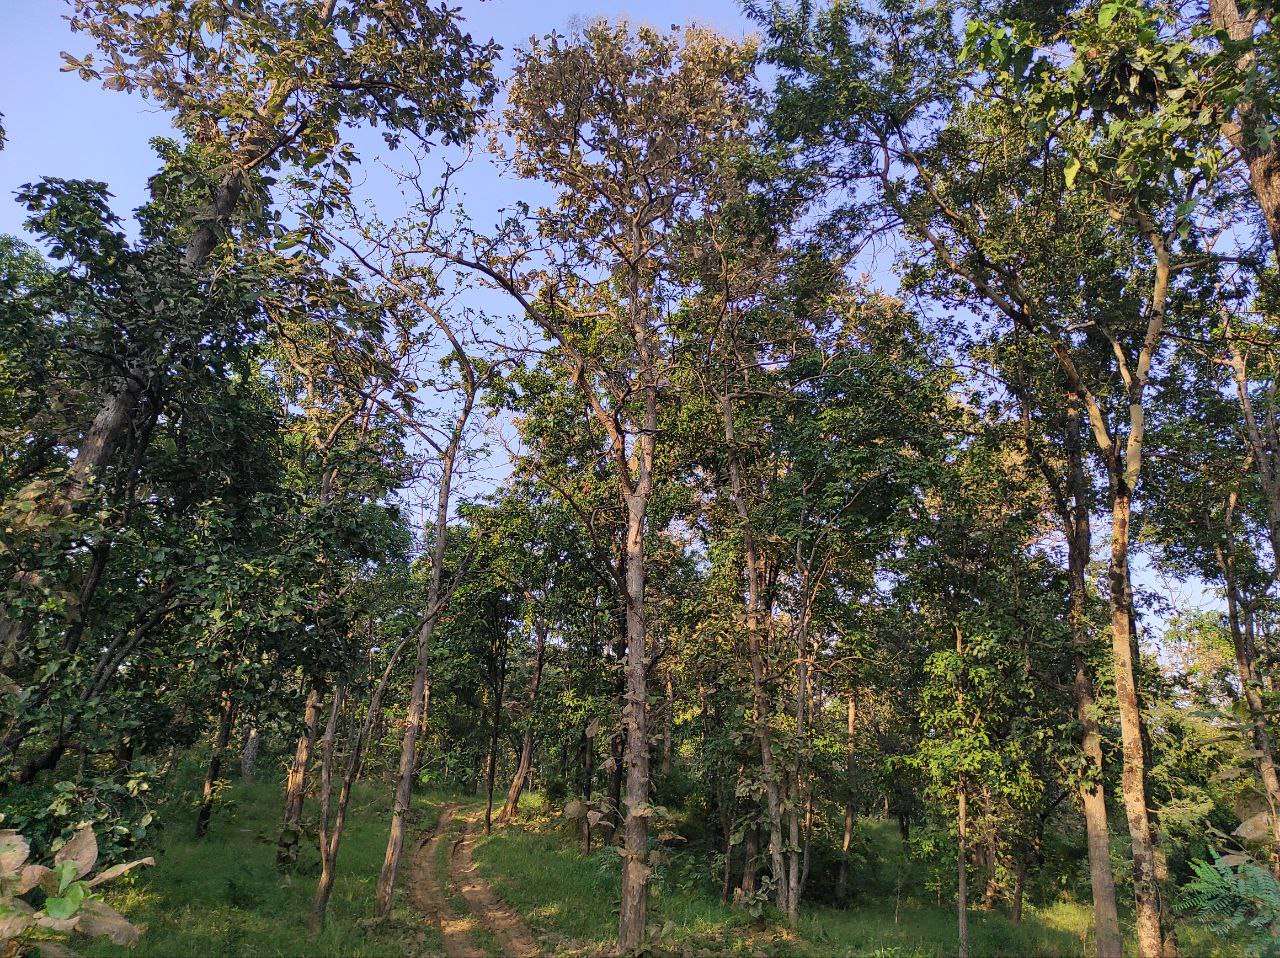  Madhya pradesh has 25 Forest area of total land